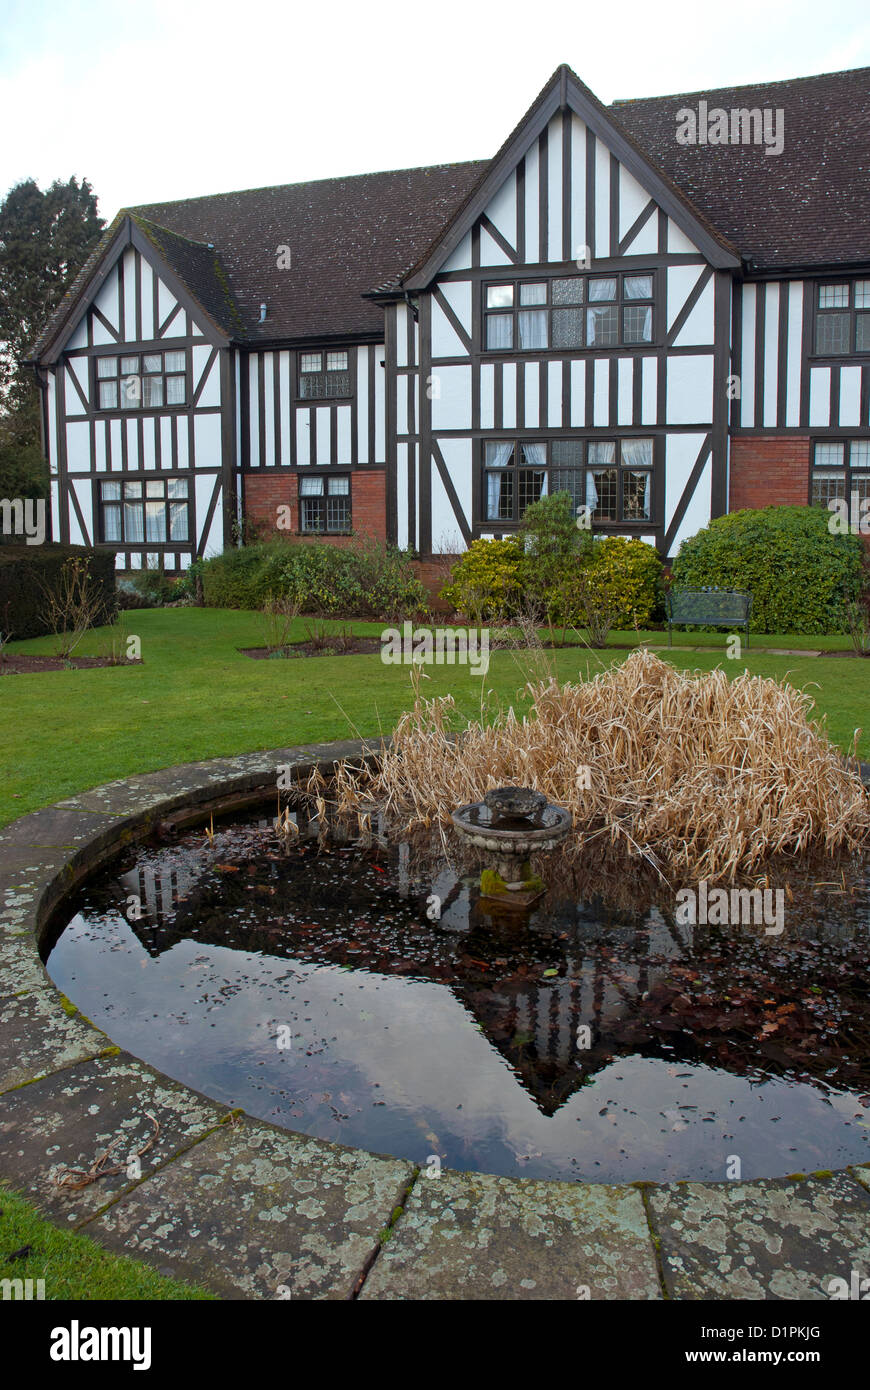 English mansion exterior and gardens Stock Photo